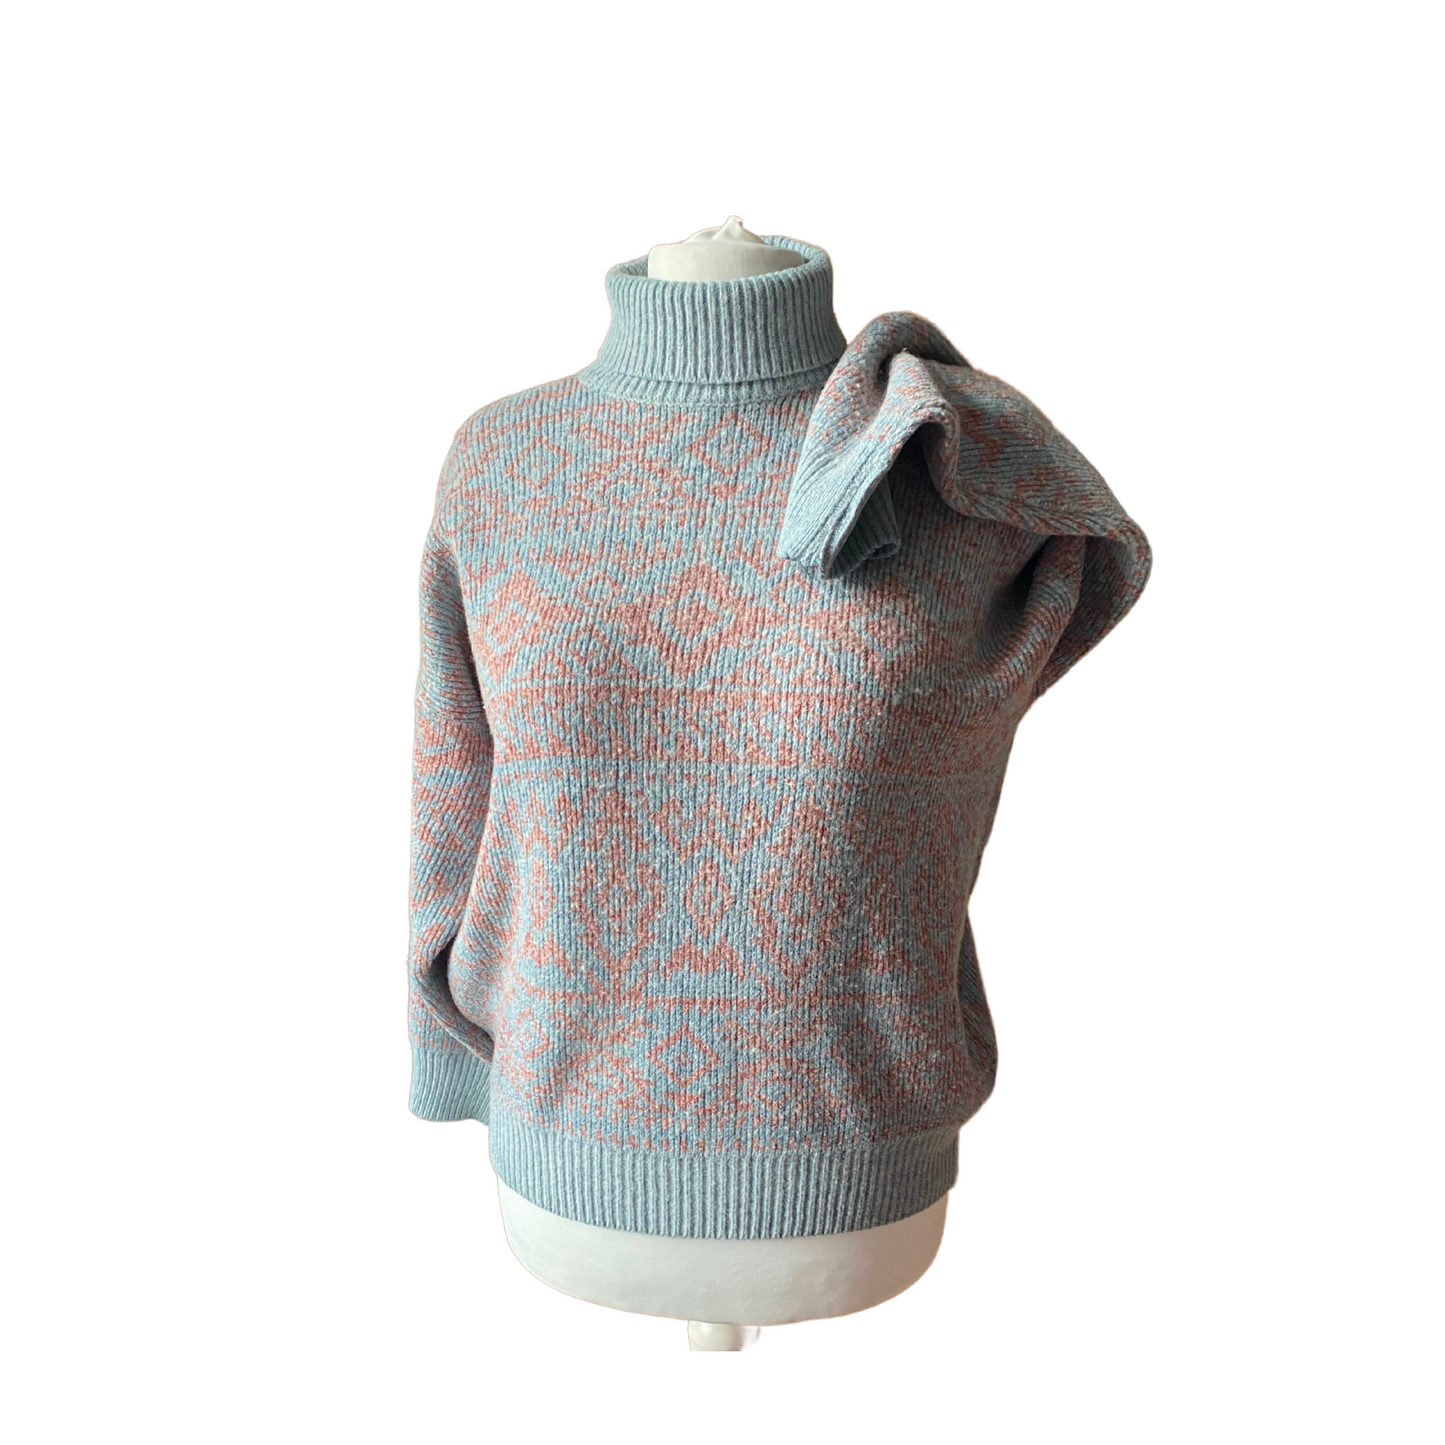 80s ribbed turtleneck sweater - pale blue with pink geometric print